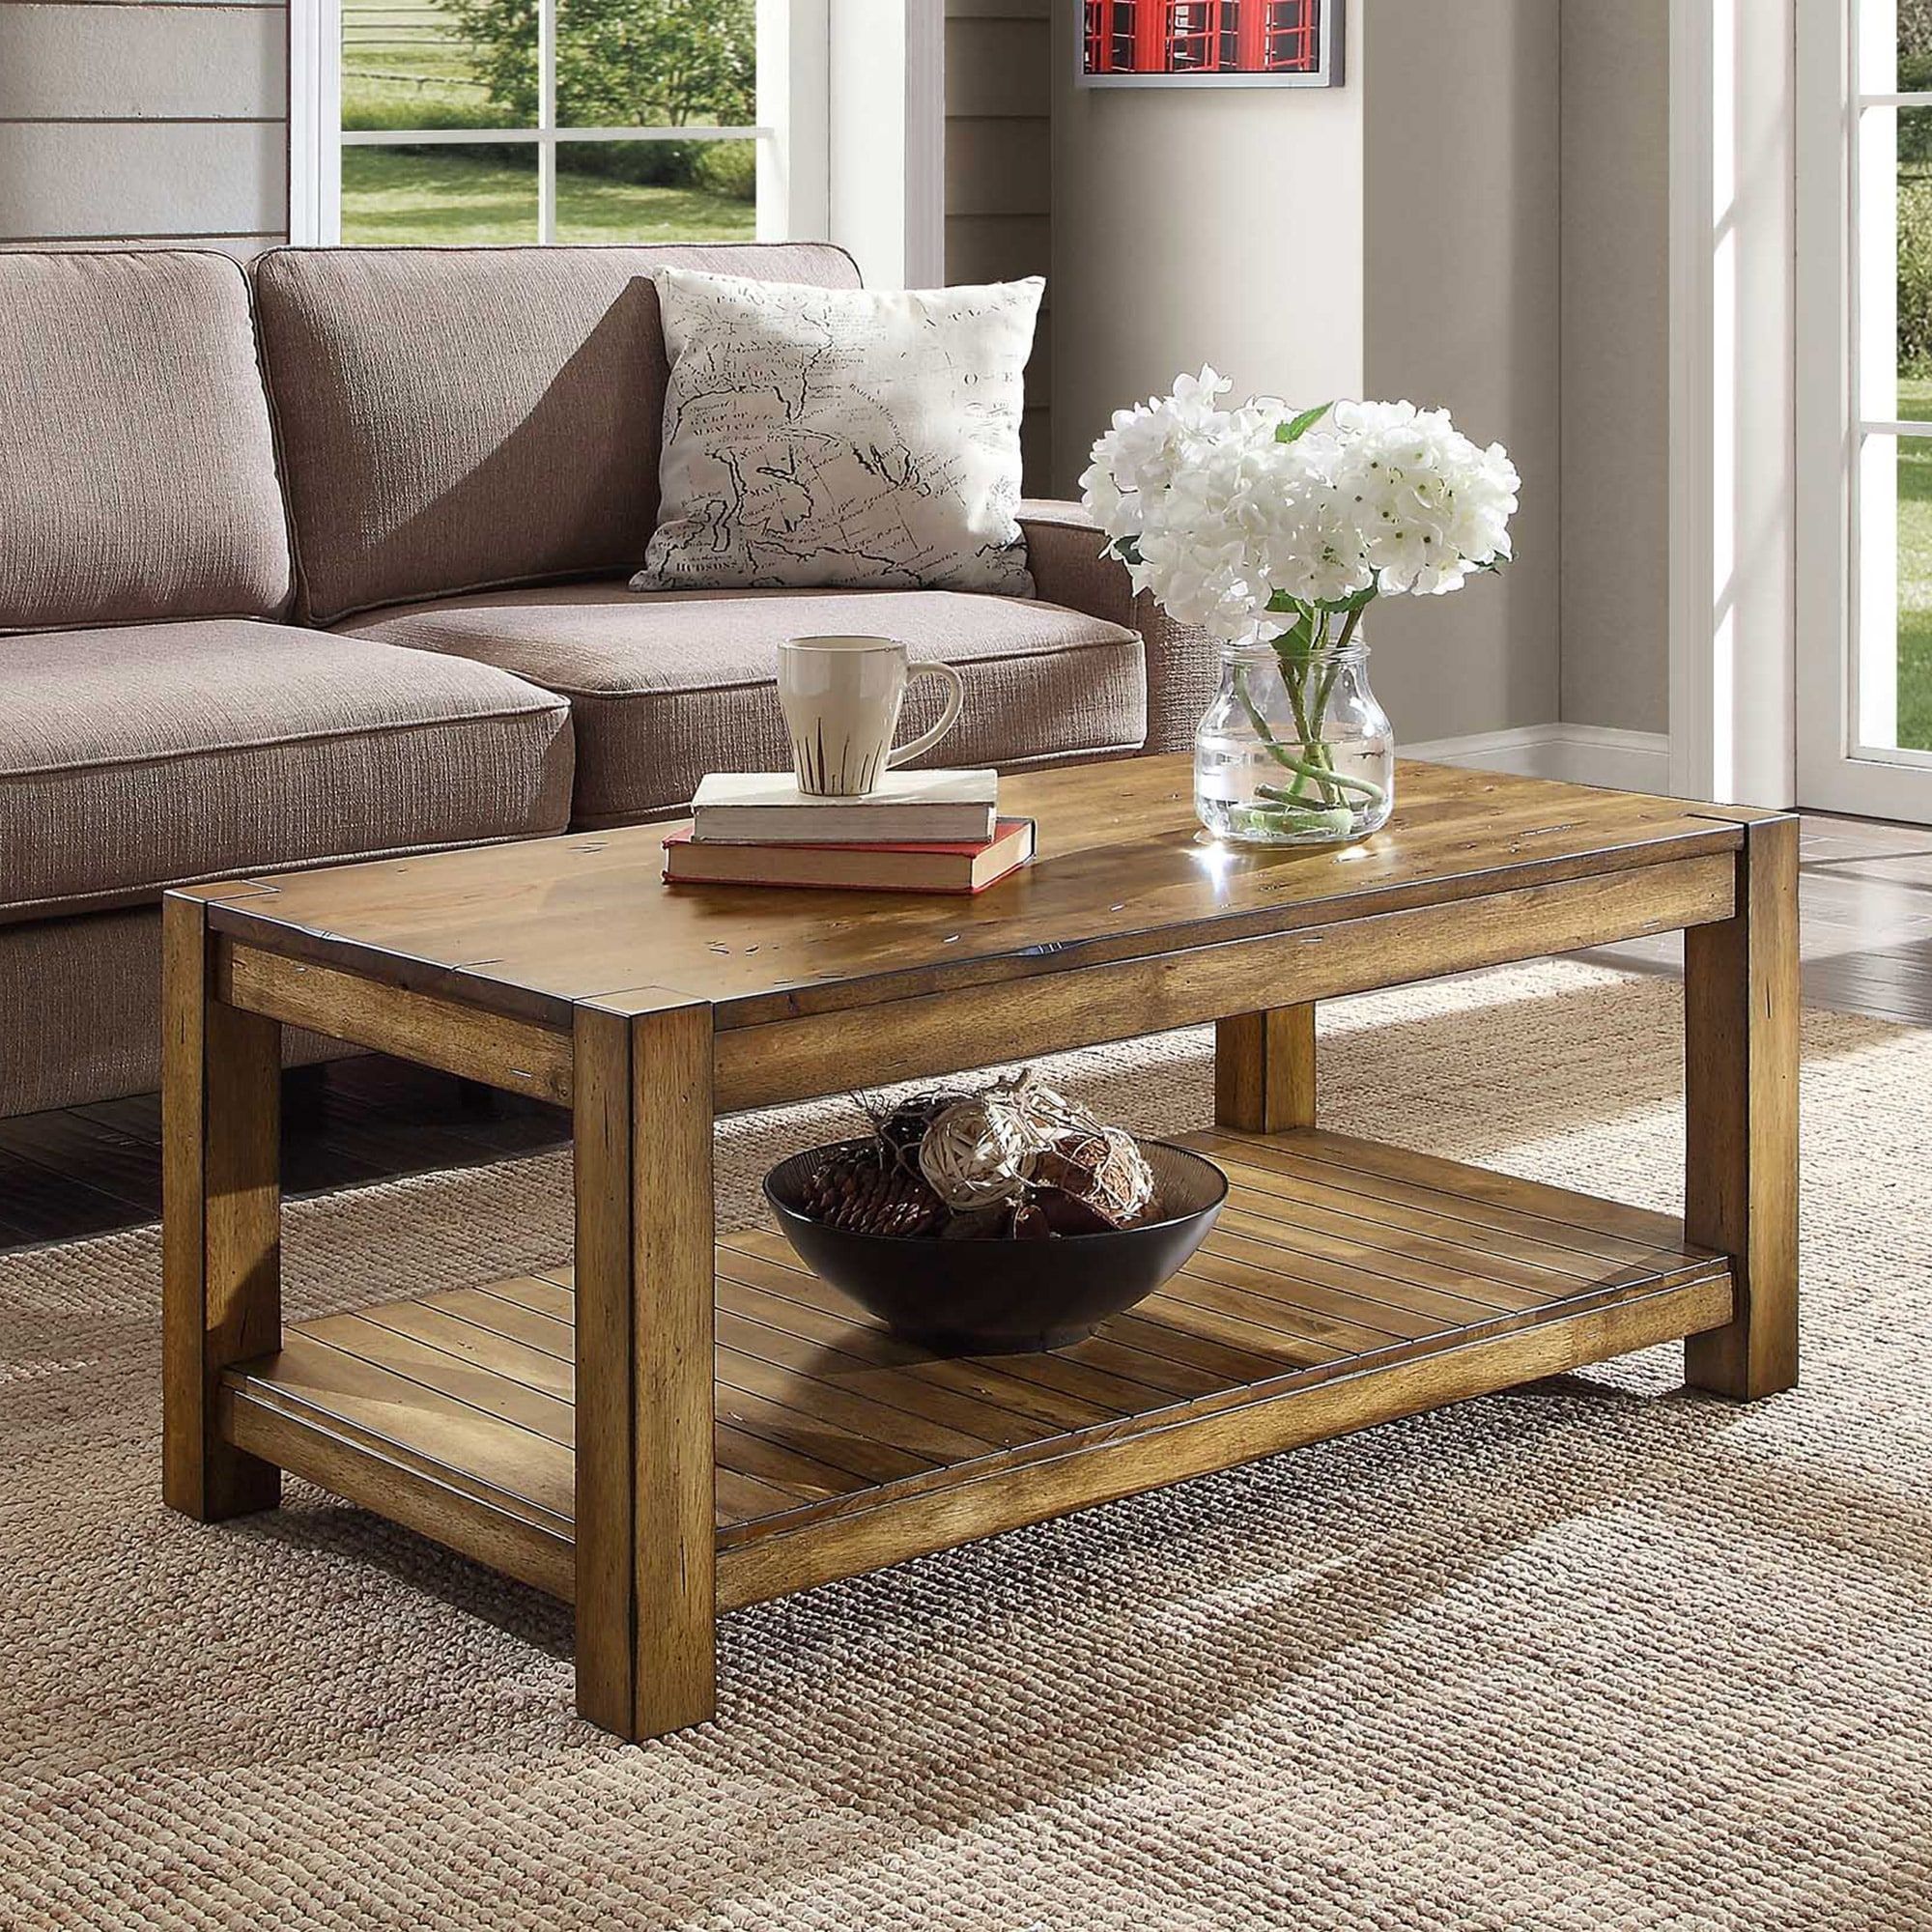 Bryant Coffee Table | Whalen Furniture Within Brown Rustic Coffee Tables (View 13 of 15)